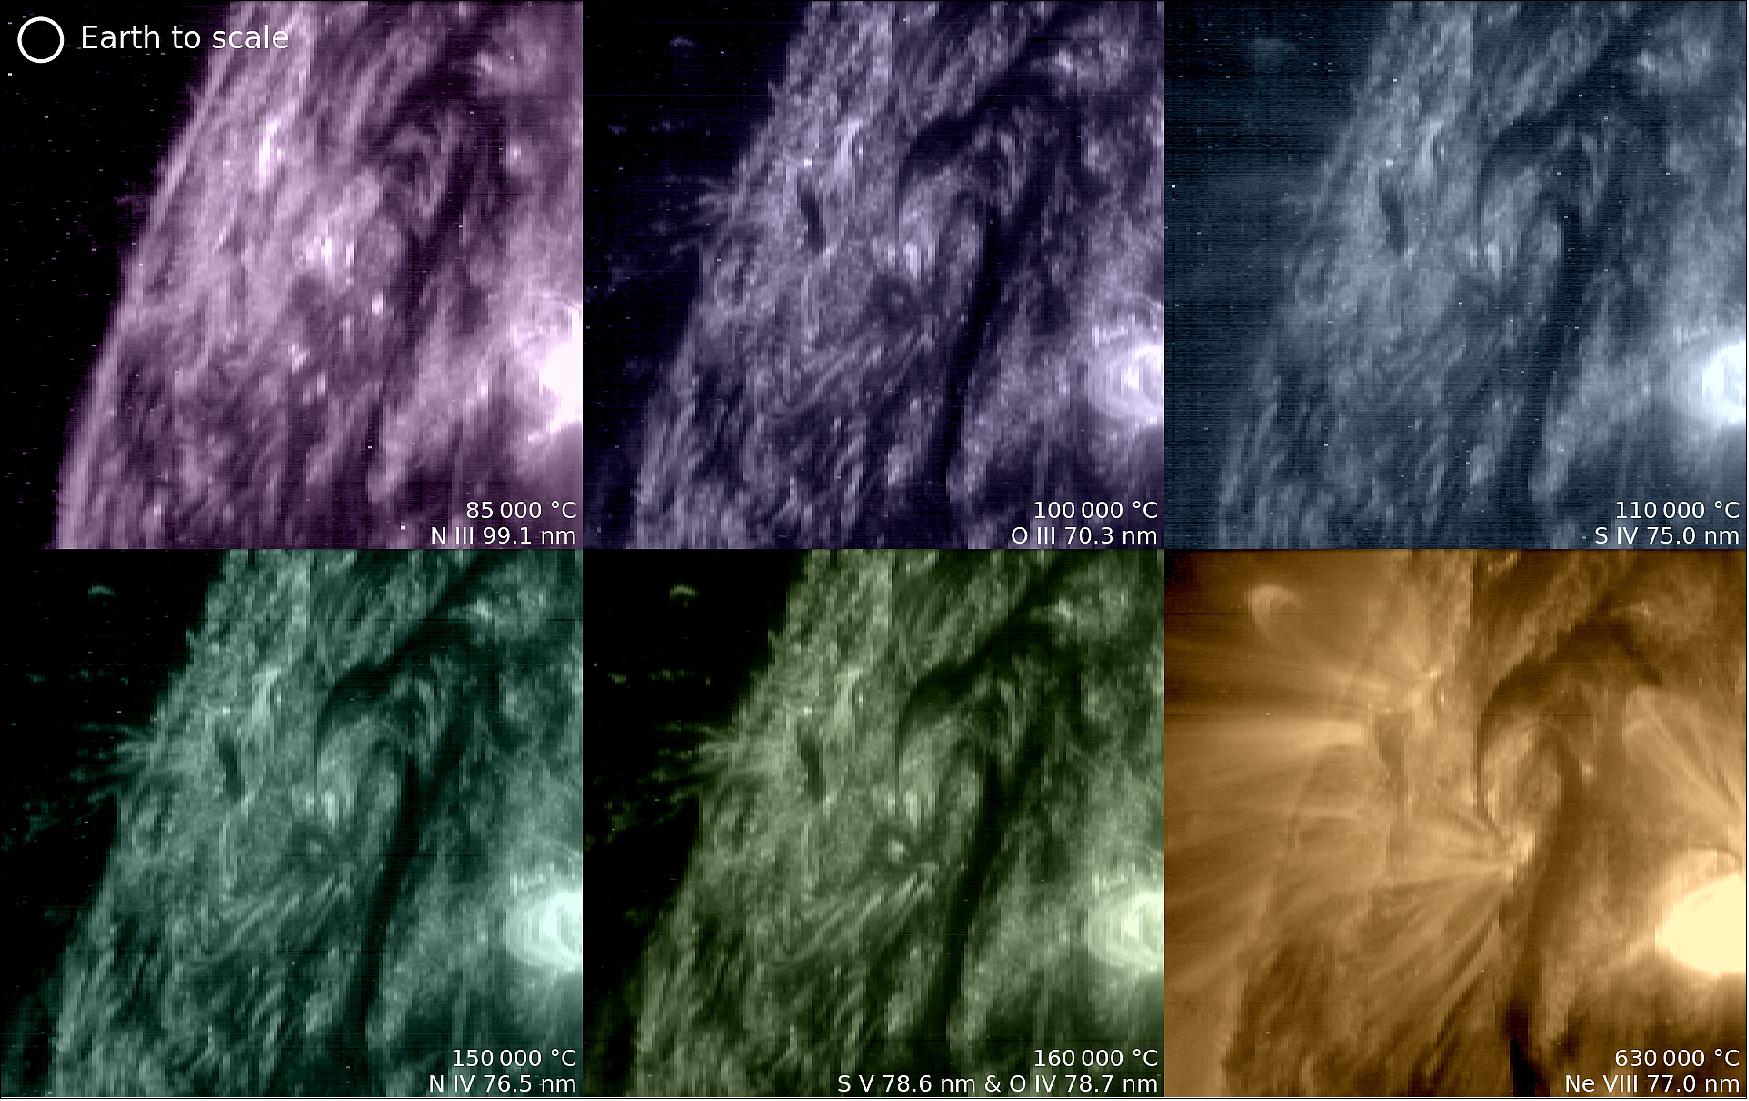 Figure 18: The image shows the same location taken at six different wavelengths of ultraviolet light on 31 March 2022. Each image has been colour coded because the wavelengths are invisible to the human eye. The images reveal the composition of the Sun's atmosphere because each of these wavelengths is characteristically emitted by different species of atoms at different temperatures. Along the top row the 99 nanometres (nm) image shows nitrogen at 85,000ºC; the 70 nm image shows oxygen at 100, 000ºC; and the 75 nm image shows sulphur at 110,000ºC. Along the bottom row the 76.5 nm image shows nitrogen at 150,000ºC, the 78 nm image shows both sulphur and oxygen at 160,000ºC, and the 77 nm image shows neon at 630,000ºC.